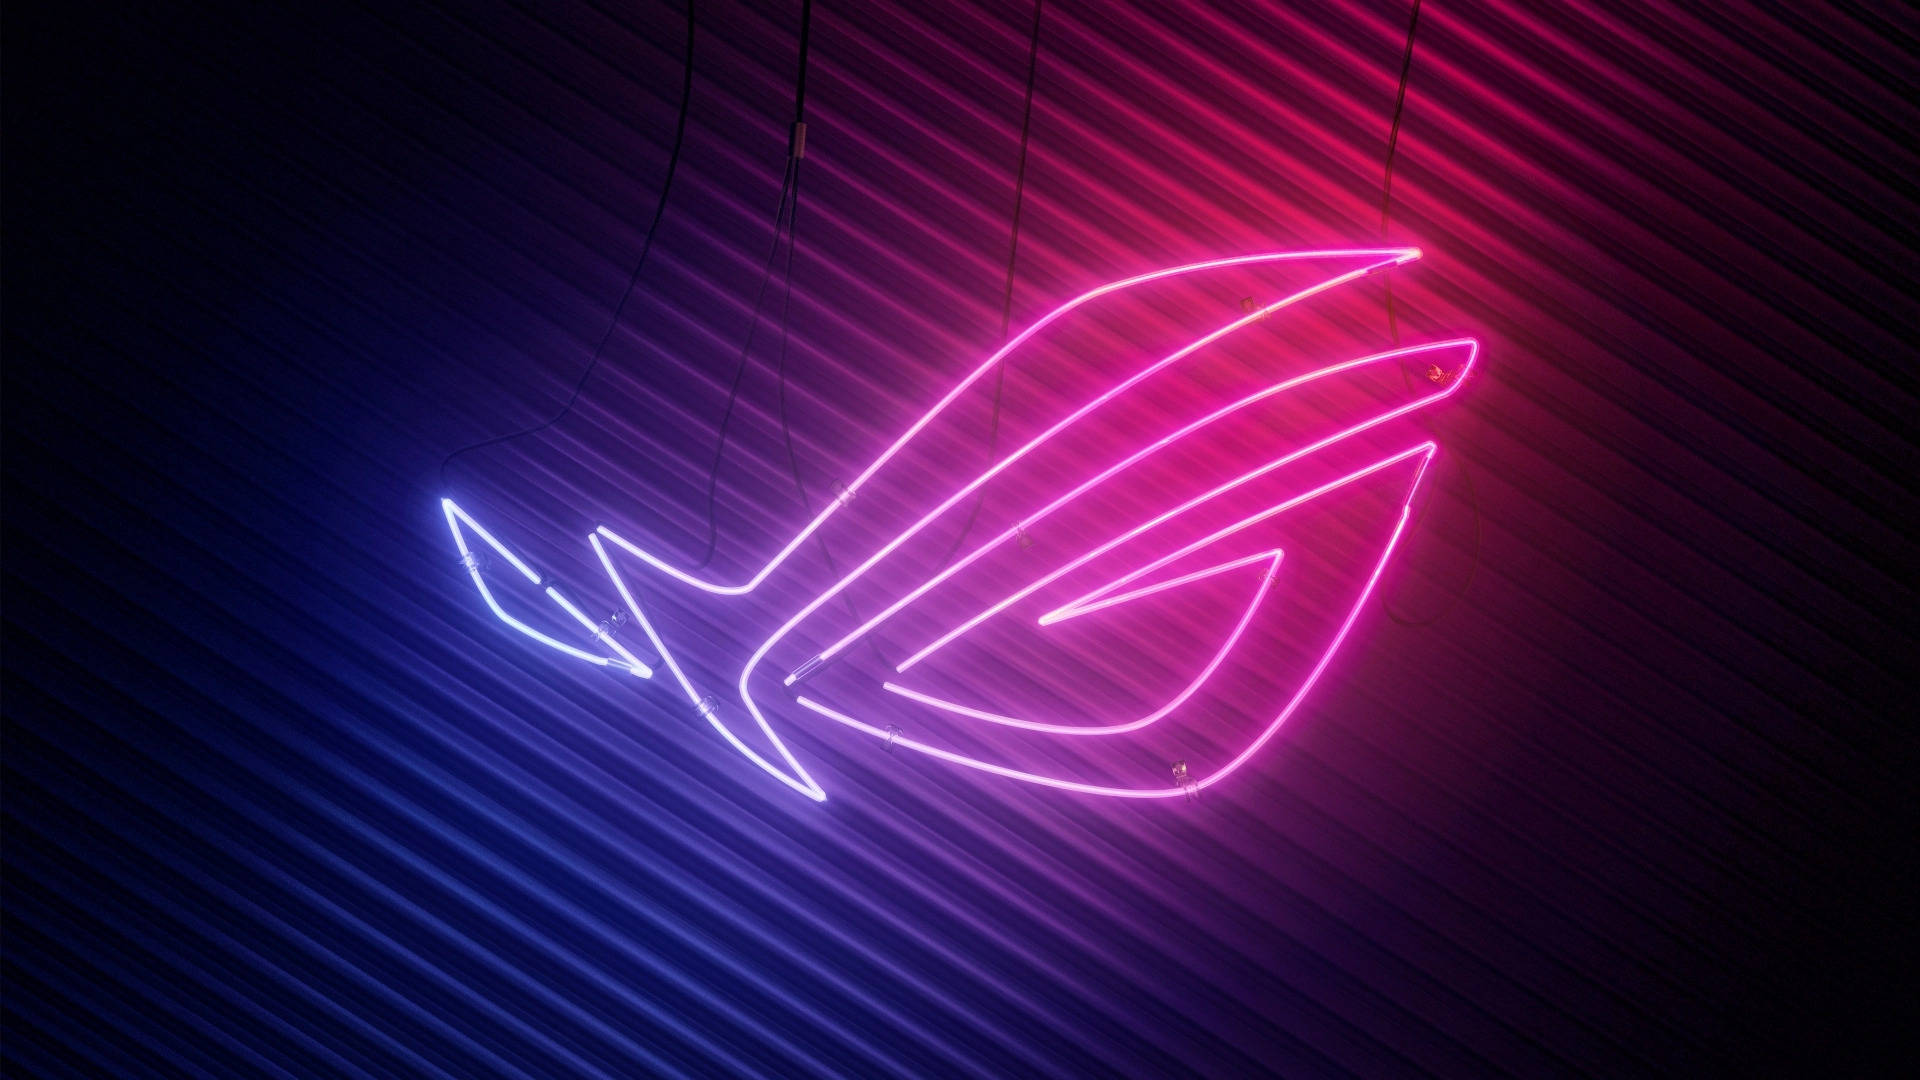 1920X1080 Asus Wallpaper and Background